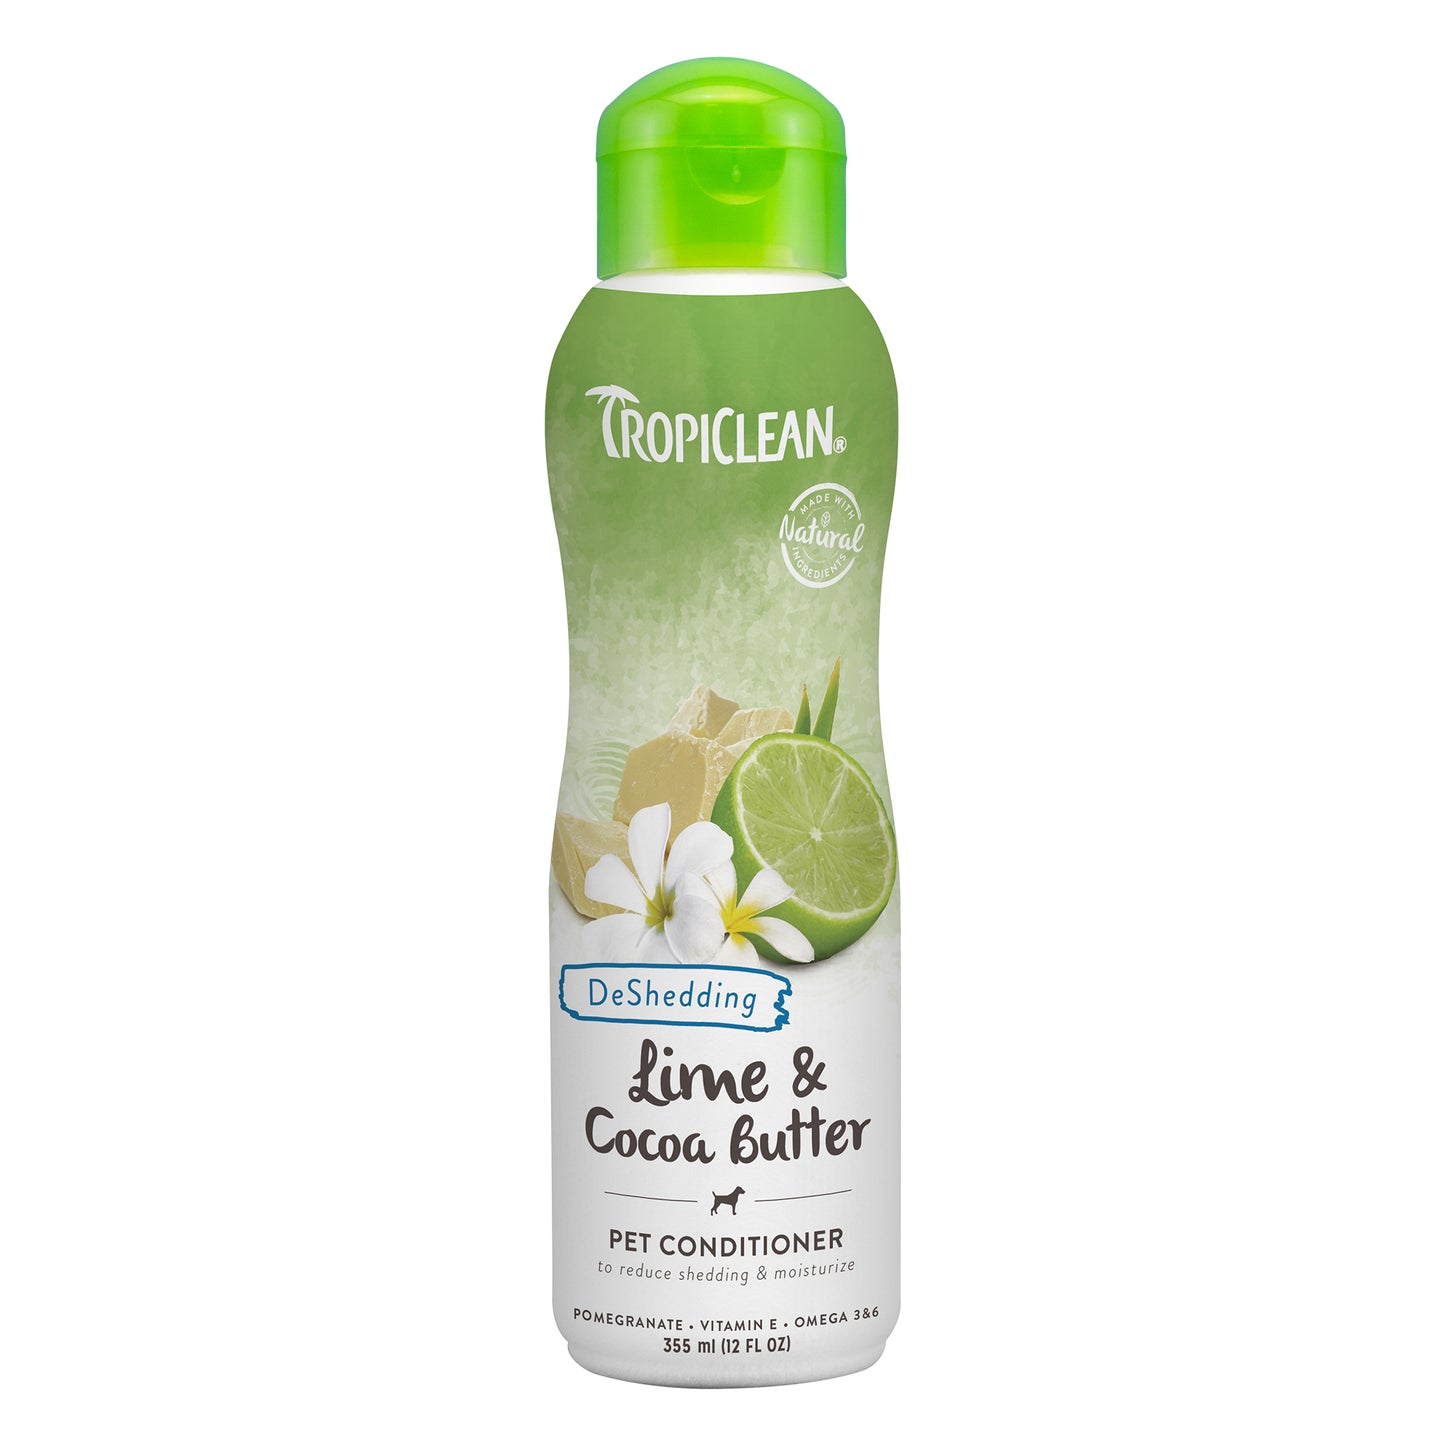 Tropiclean Lime & Cocoa Butter Pet Conditioner (Deshedding)